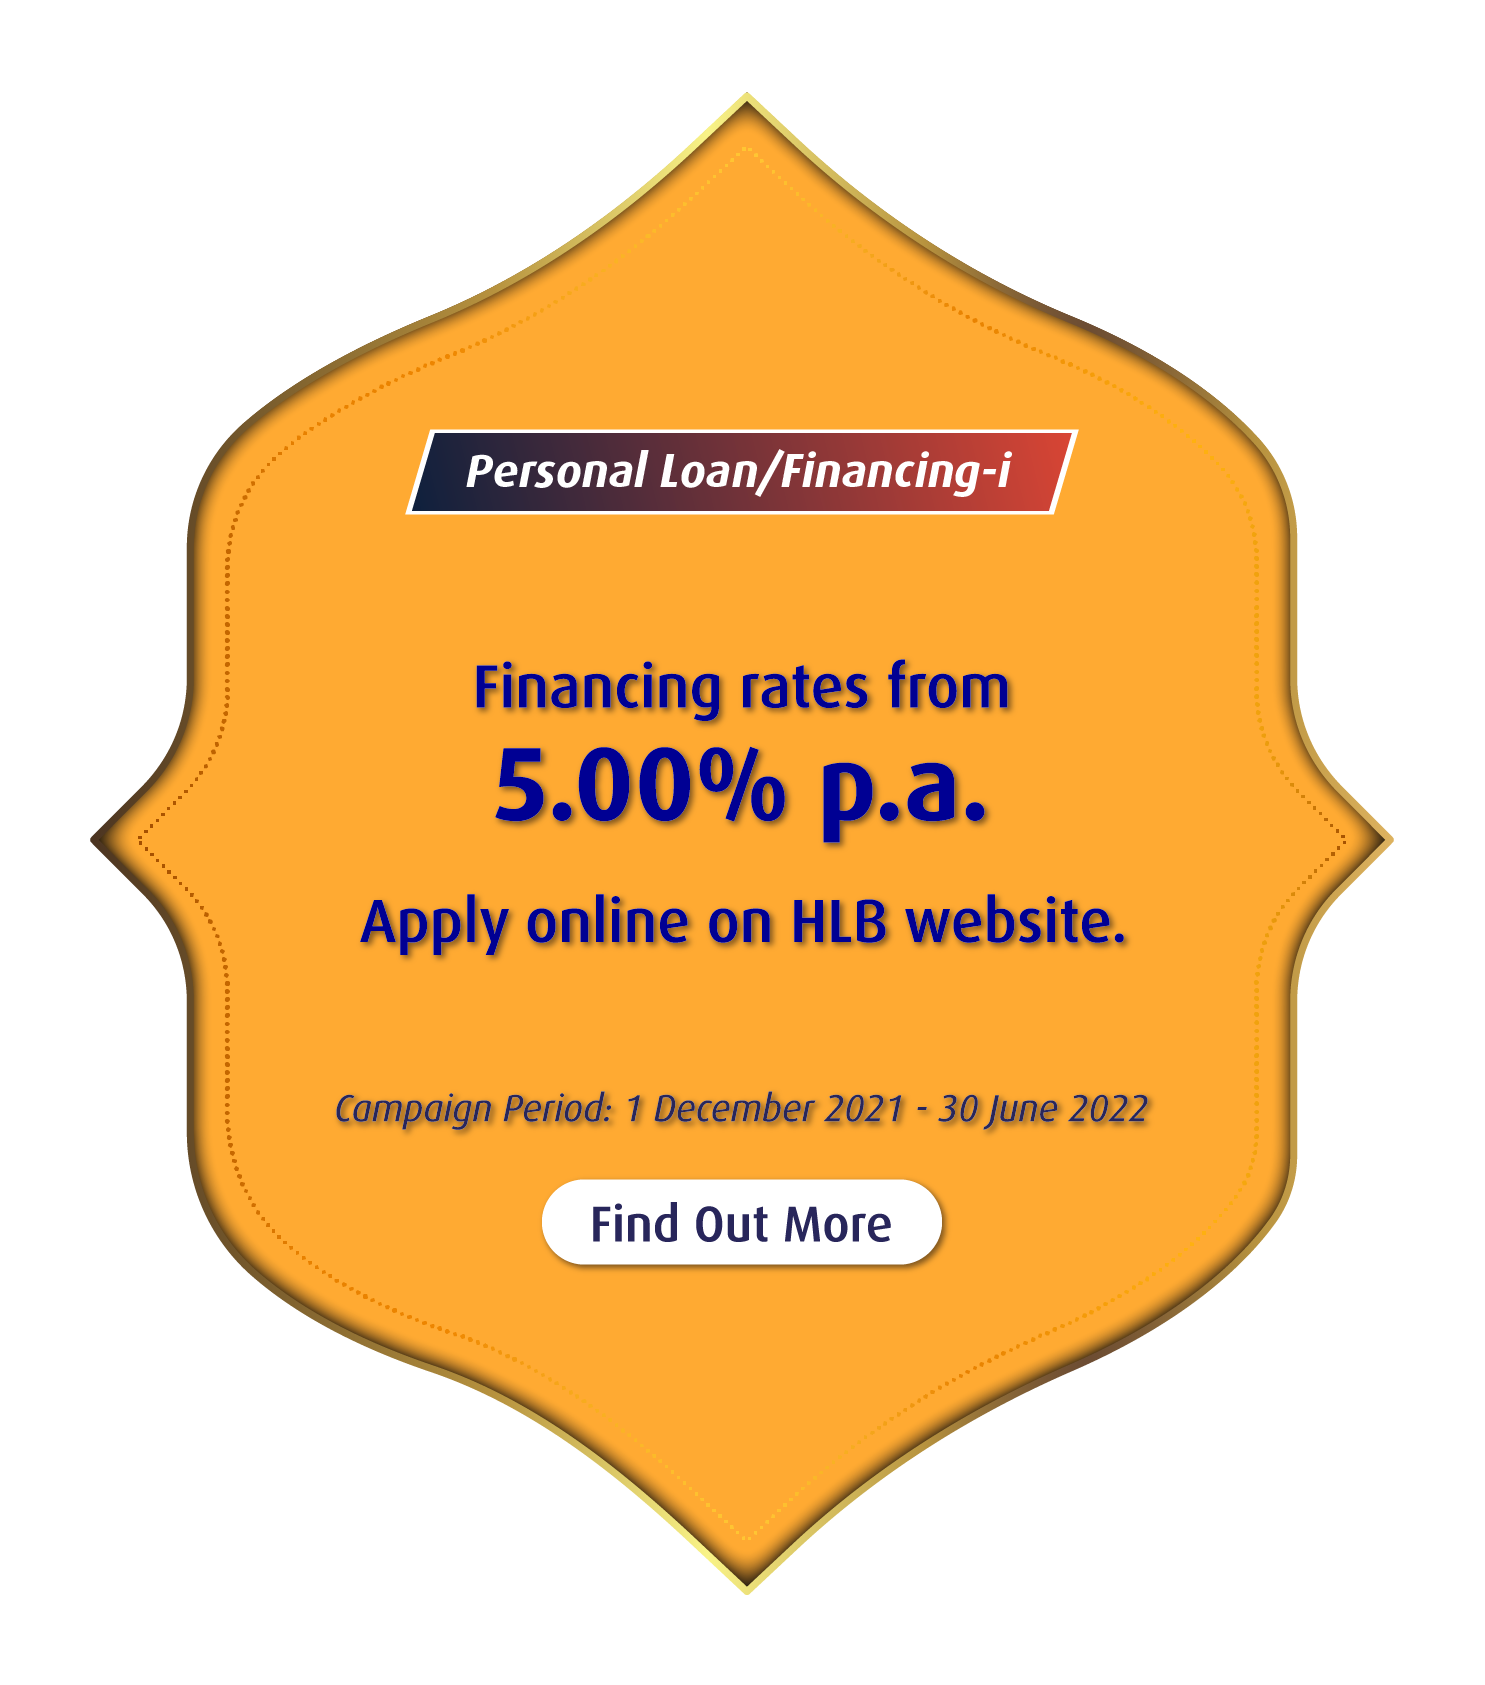 Financing rates from 5.00% p.a.